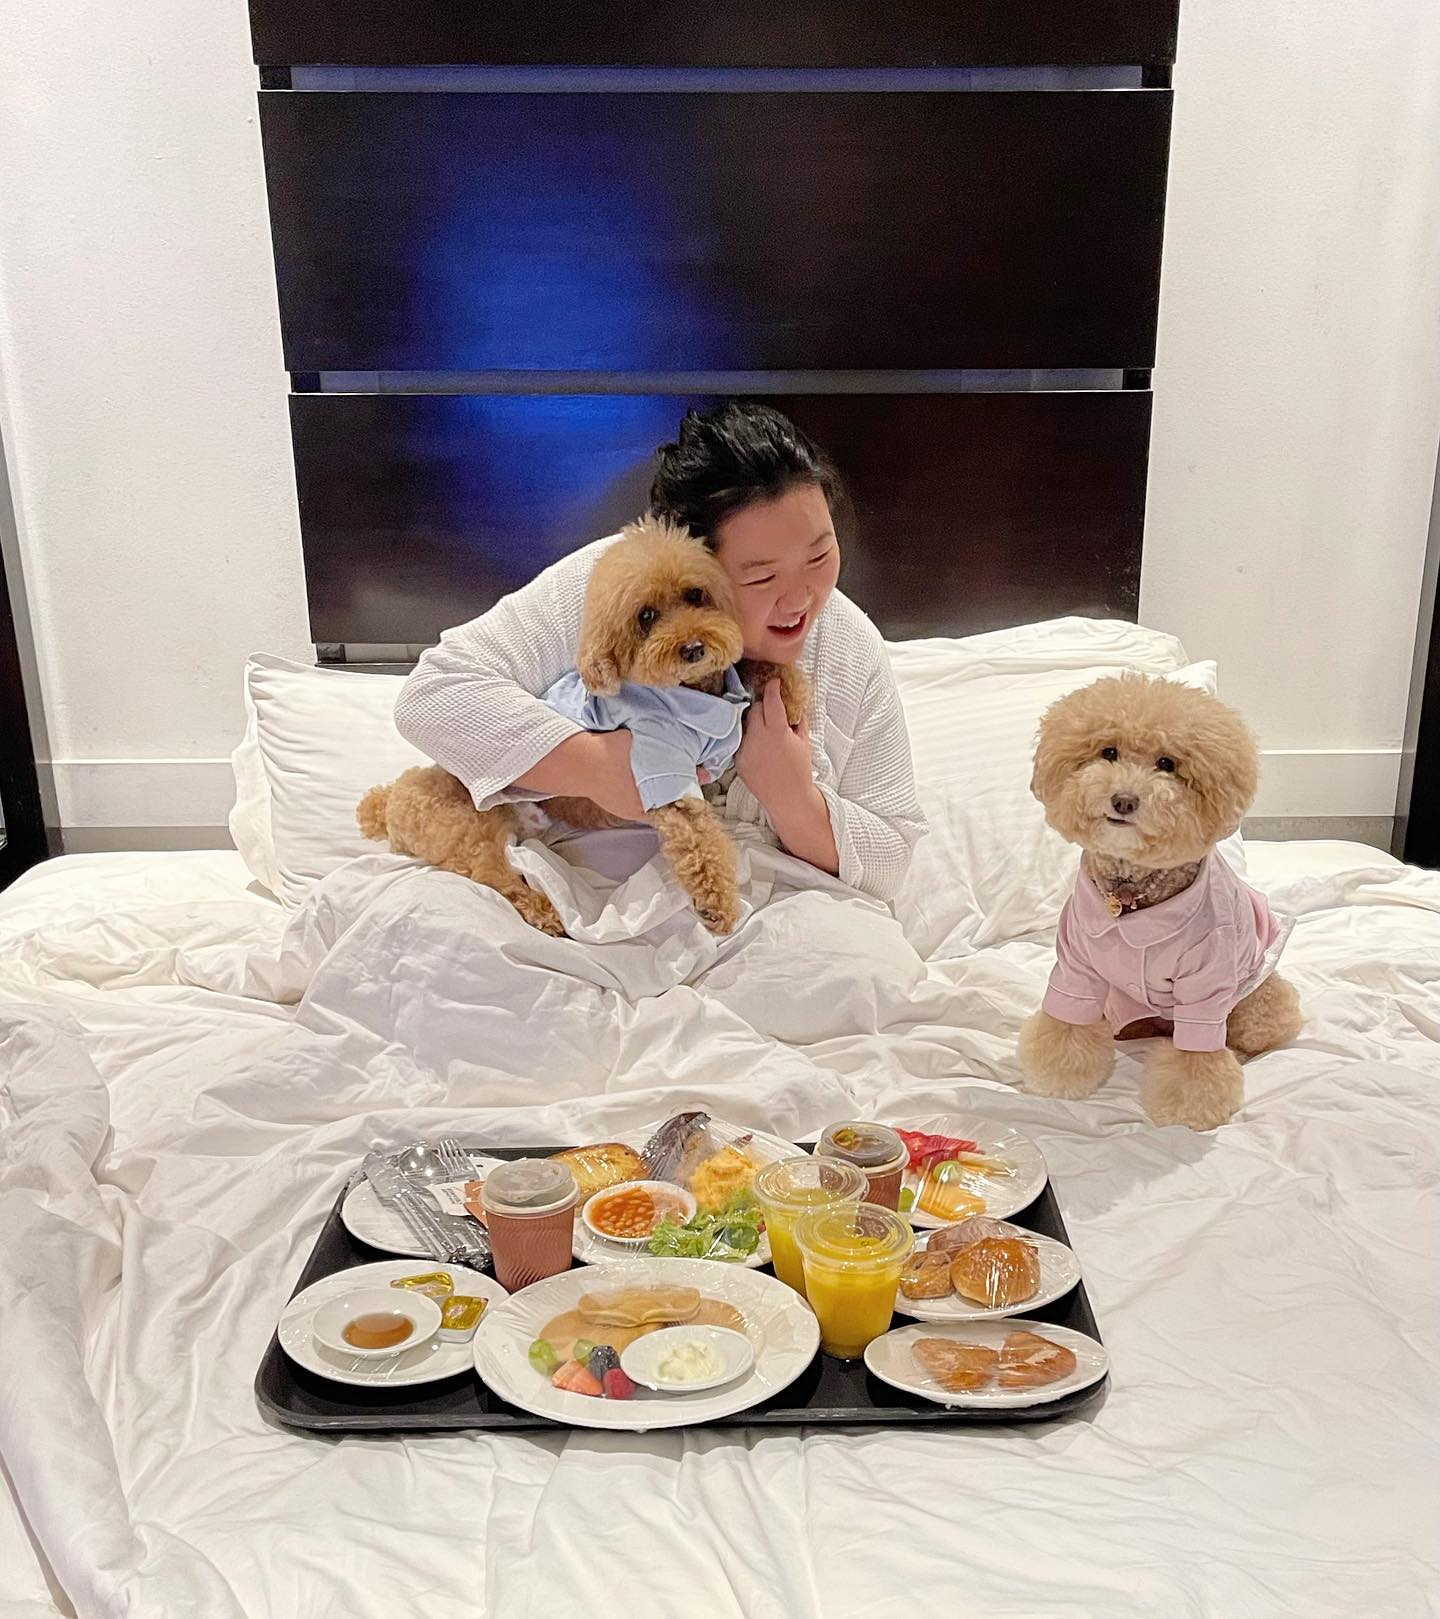 Pet-Friendly Hotels, Resorts, & Chalets in Singapore - Amara Sanctuary Sentosa - Pampered Paws package